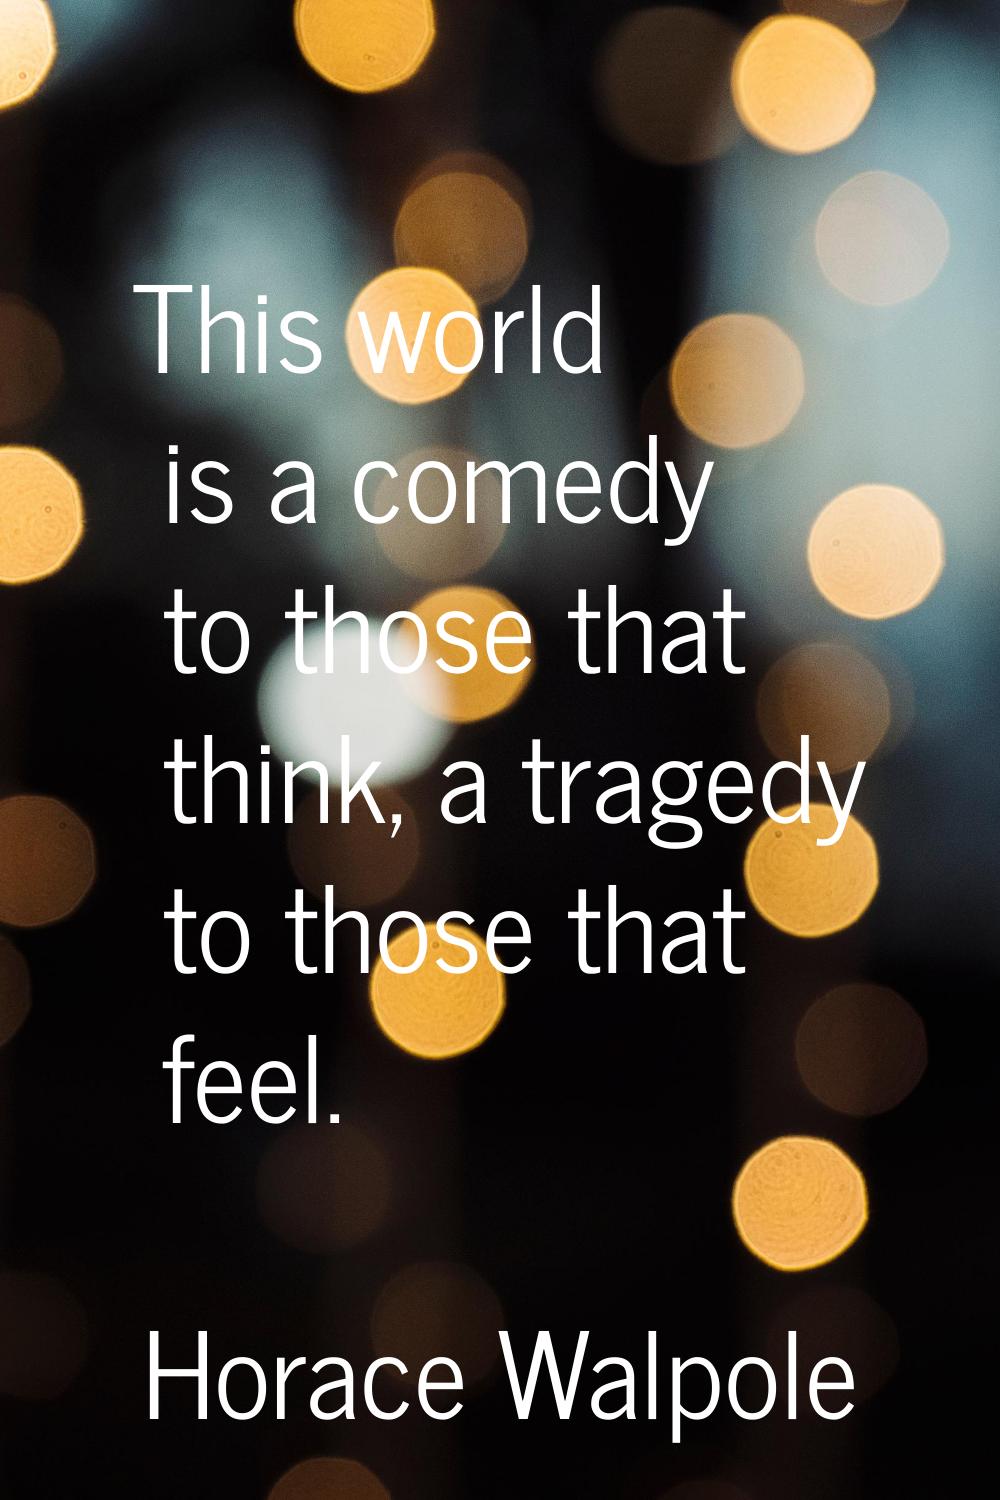 This world is a comedy to those that think, a tragedy to those that feel.